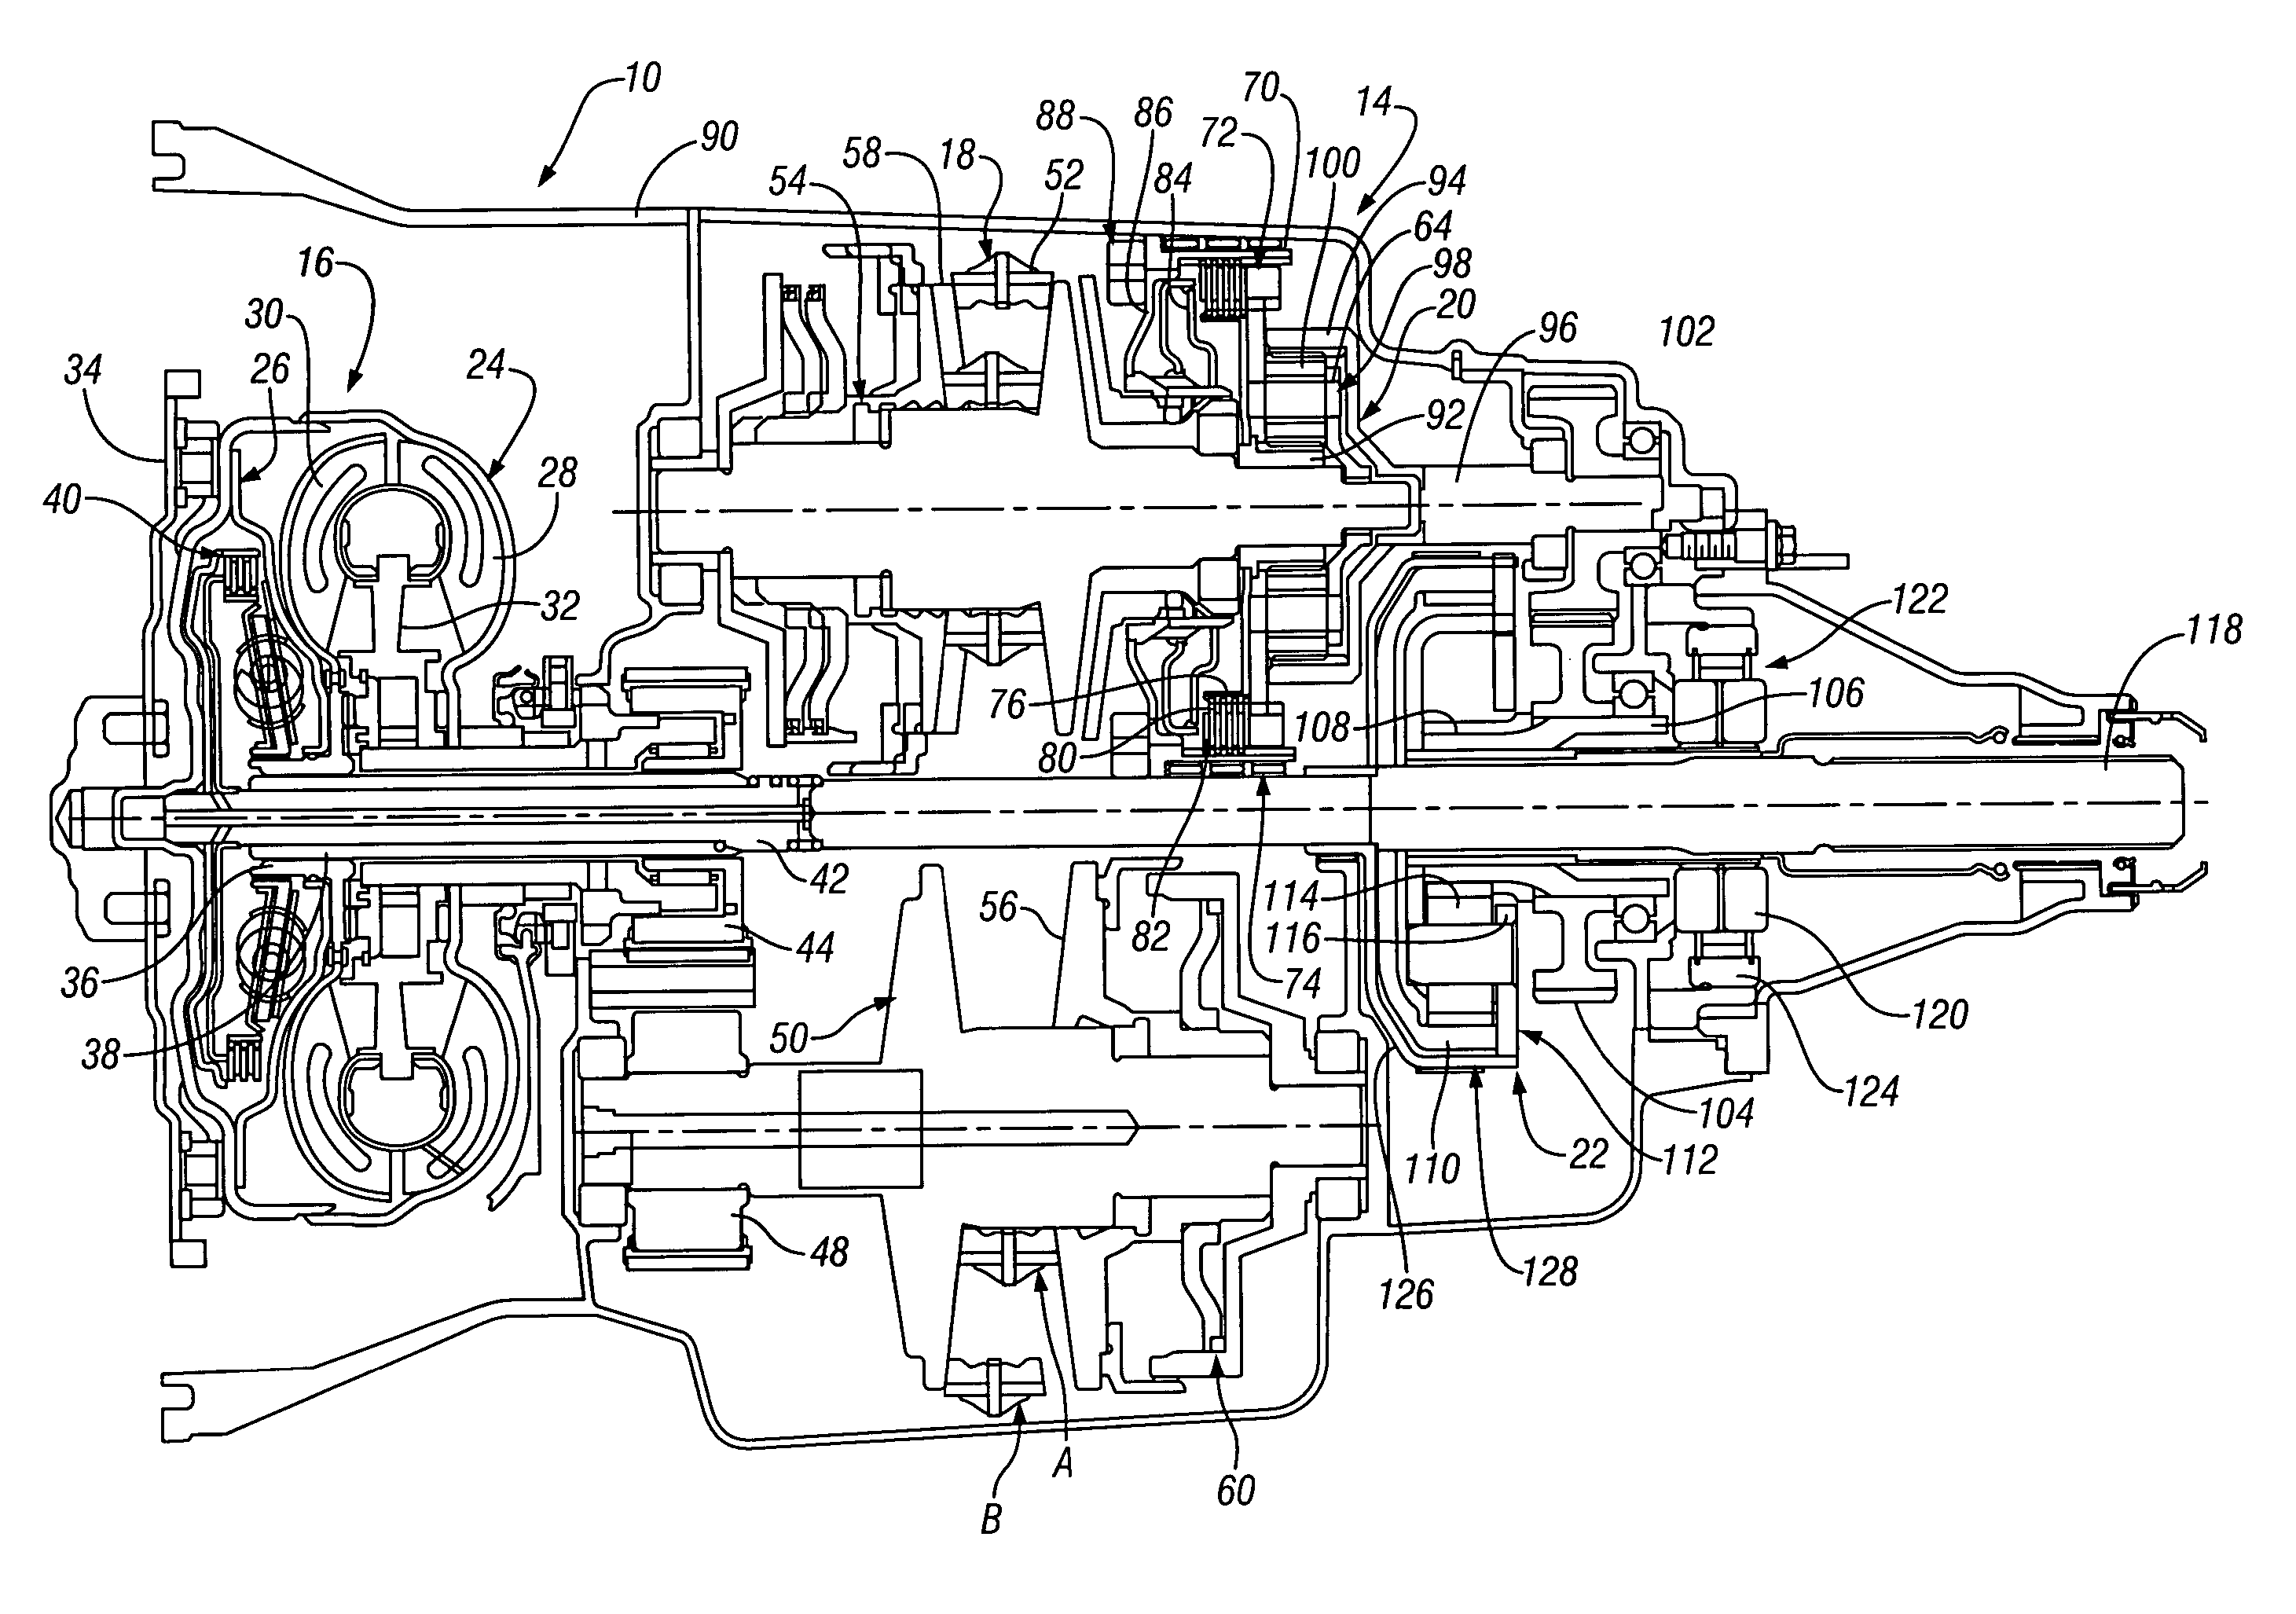 Three-mode continuously variable transmission with a direct low mode and two split path high modes